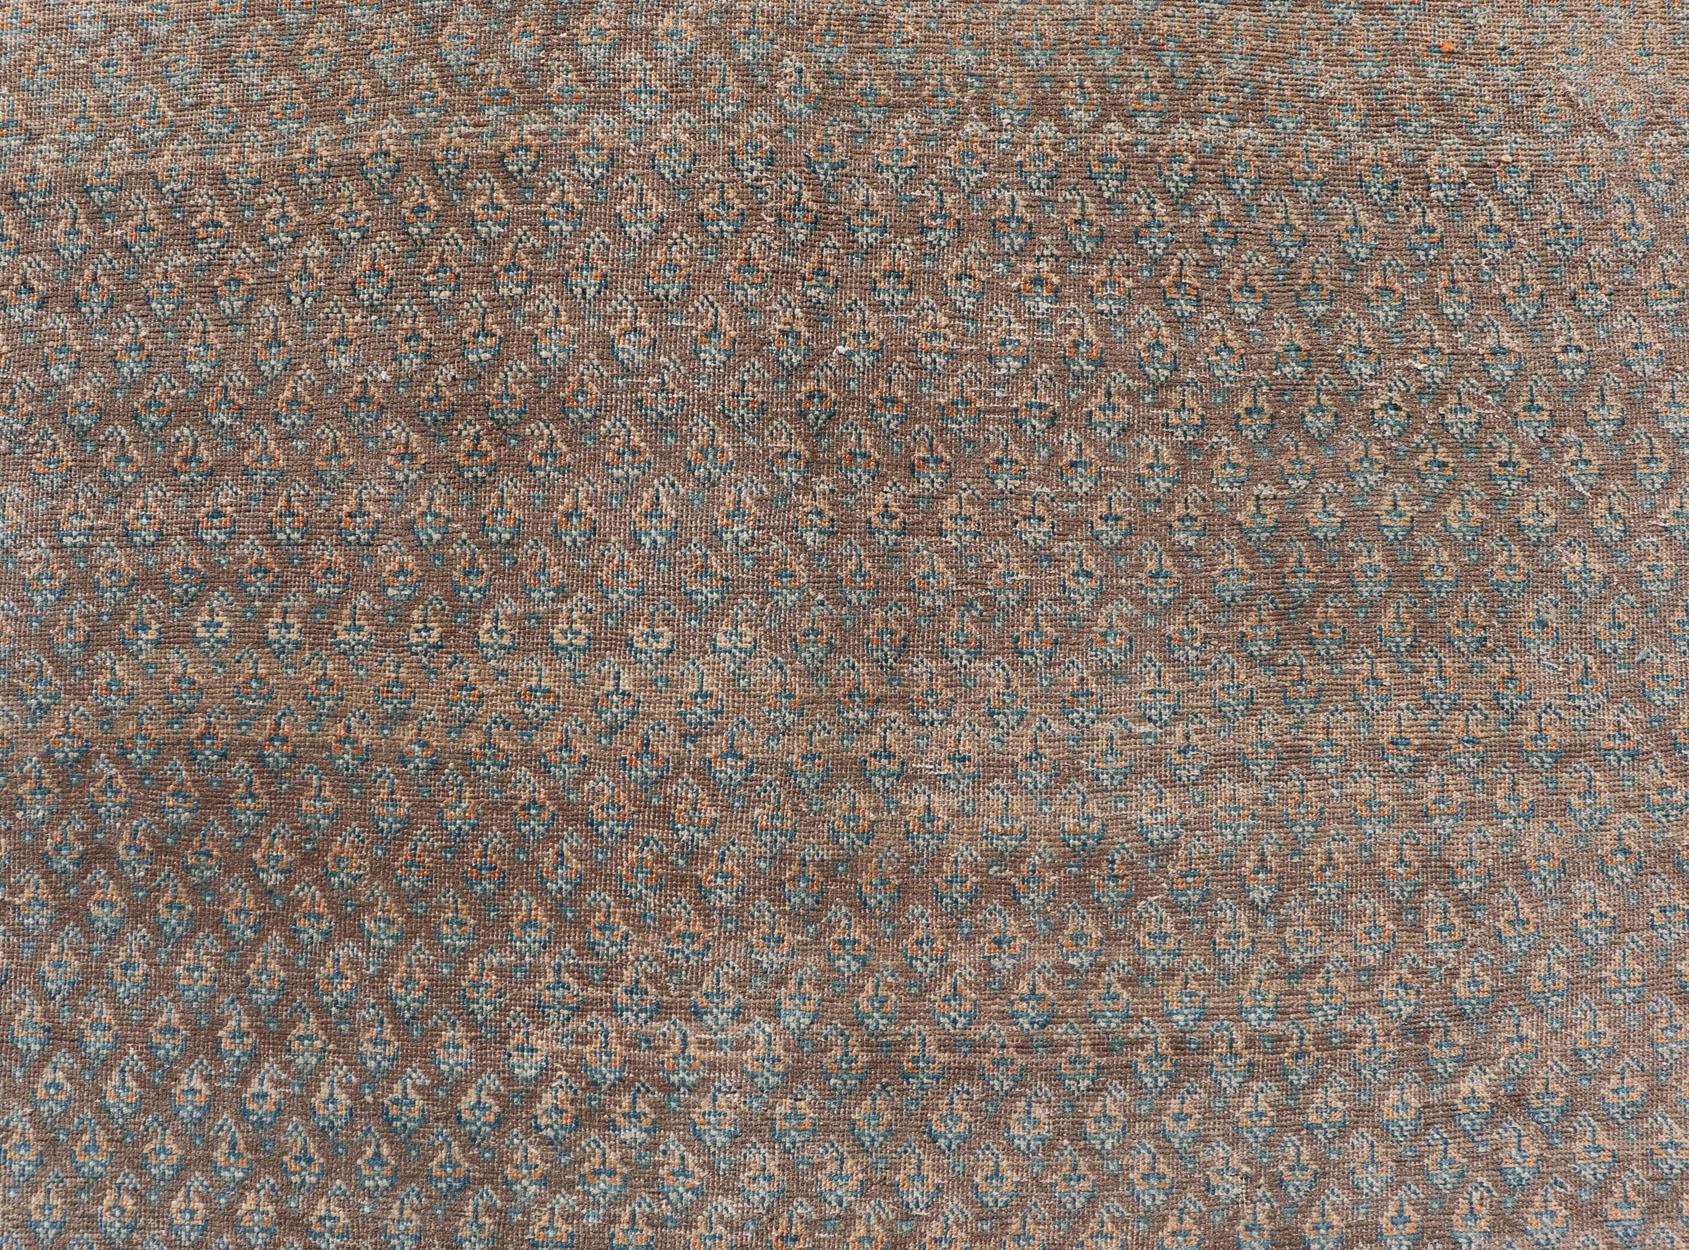 Persian Tabriz Rug with All-Over Saraband Design in Brown and Blue 8